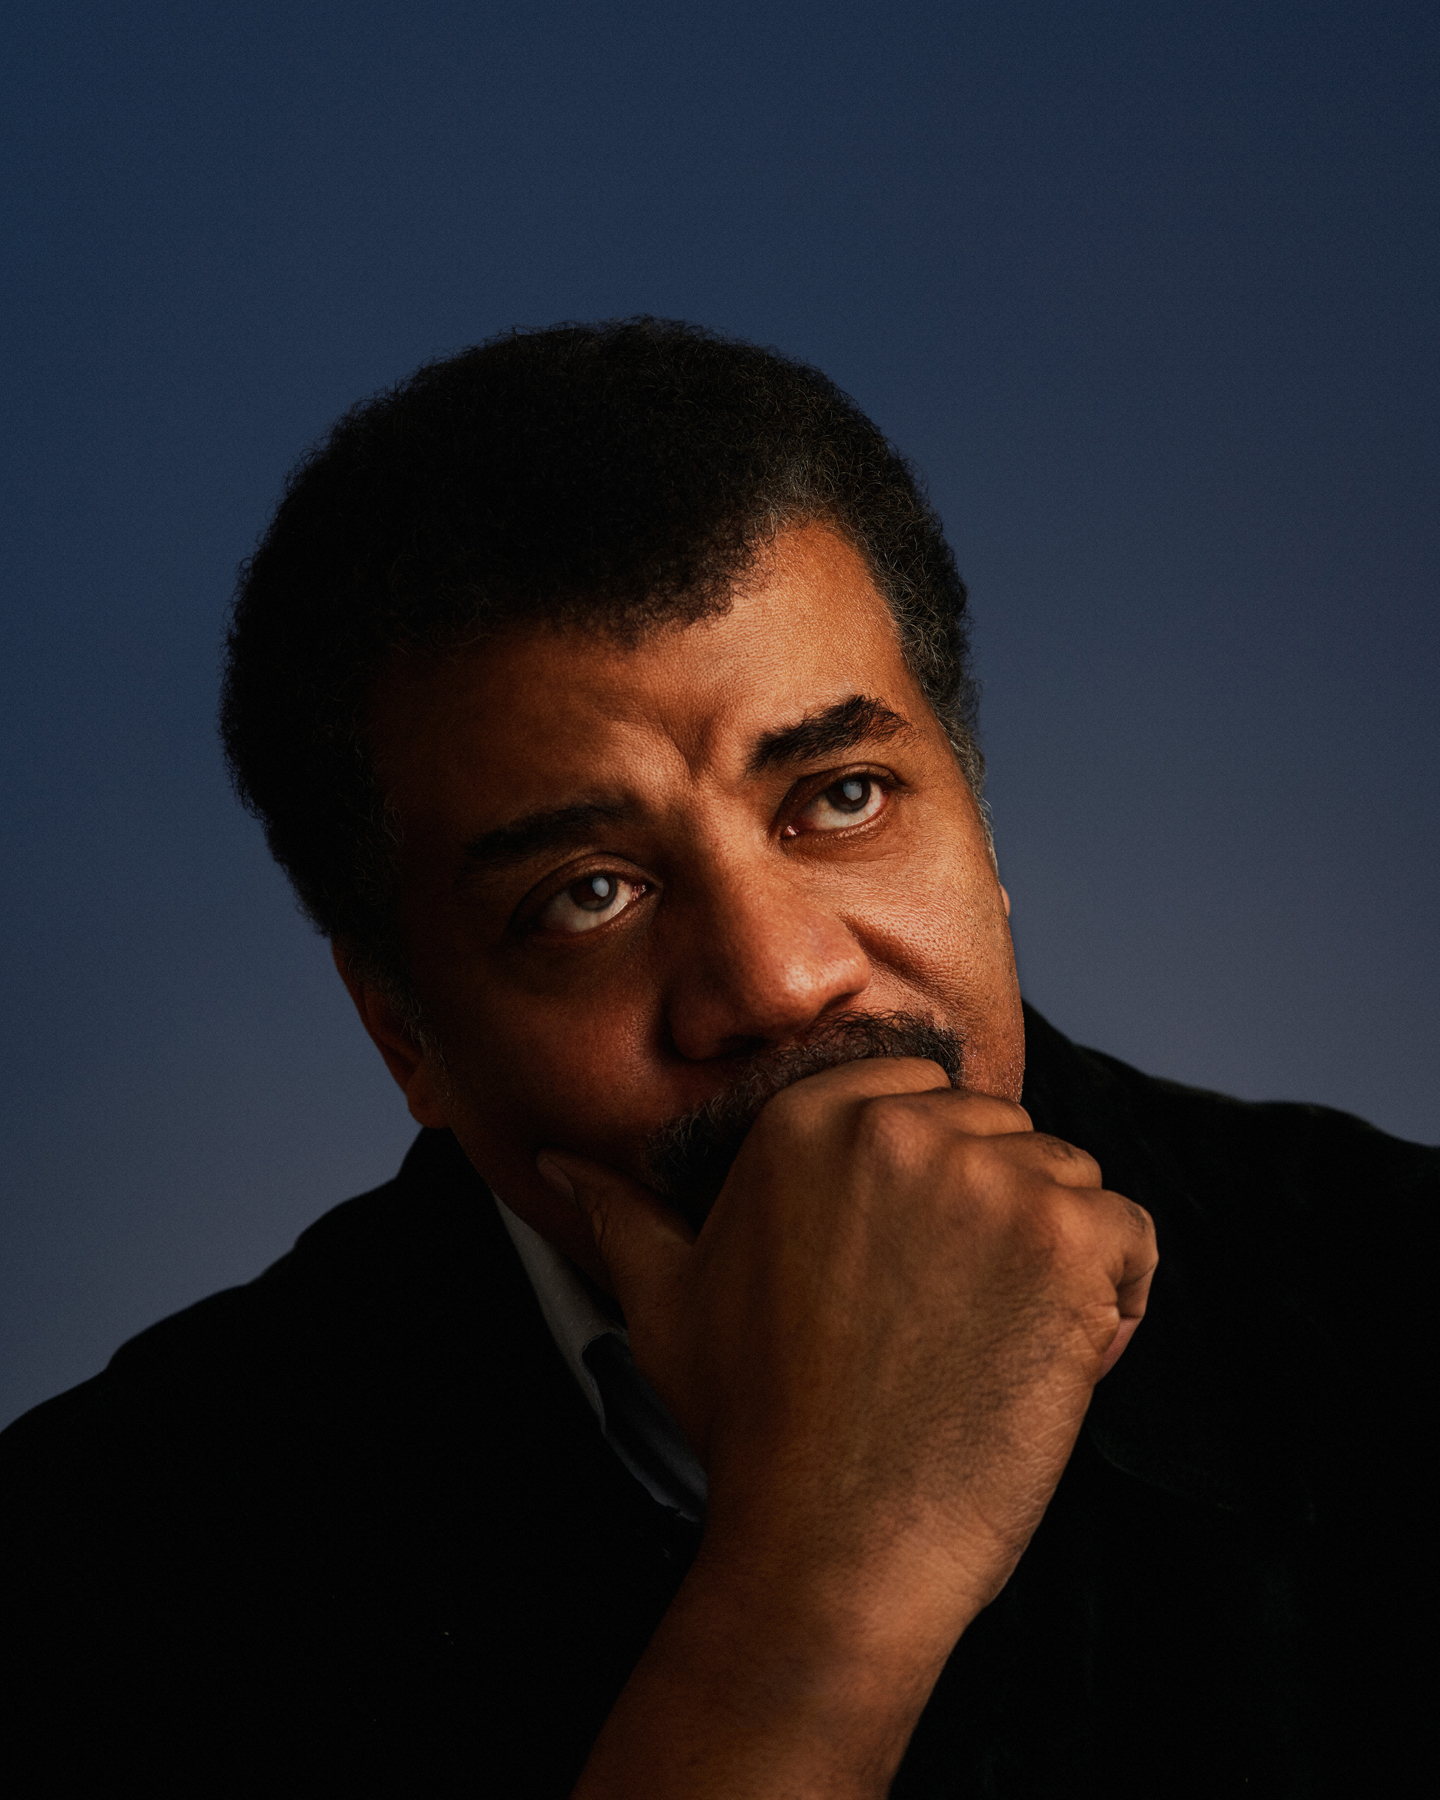 A photo of Neil deGrasse Tyson looking ponderous.